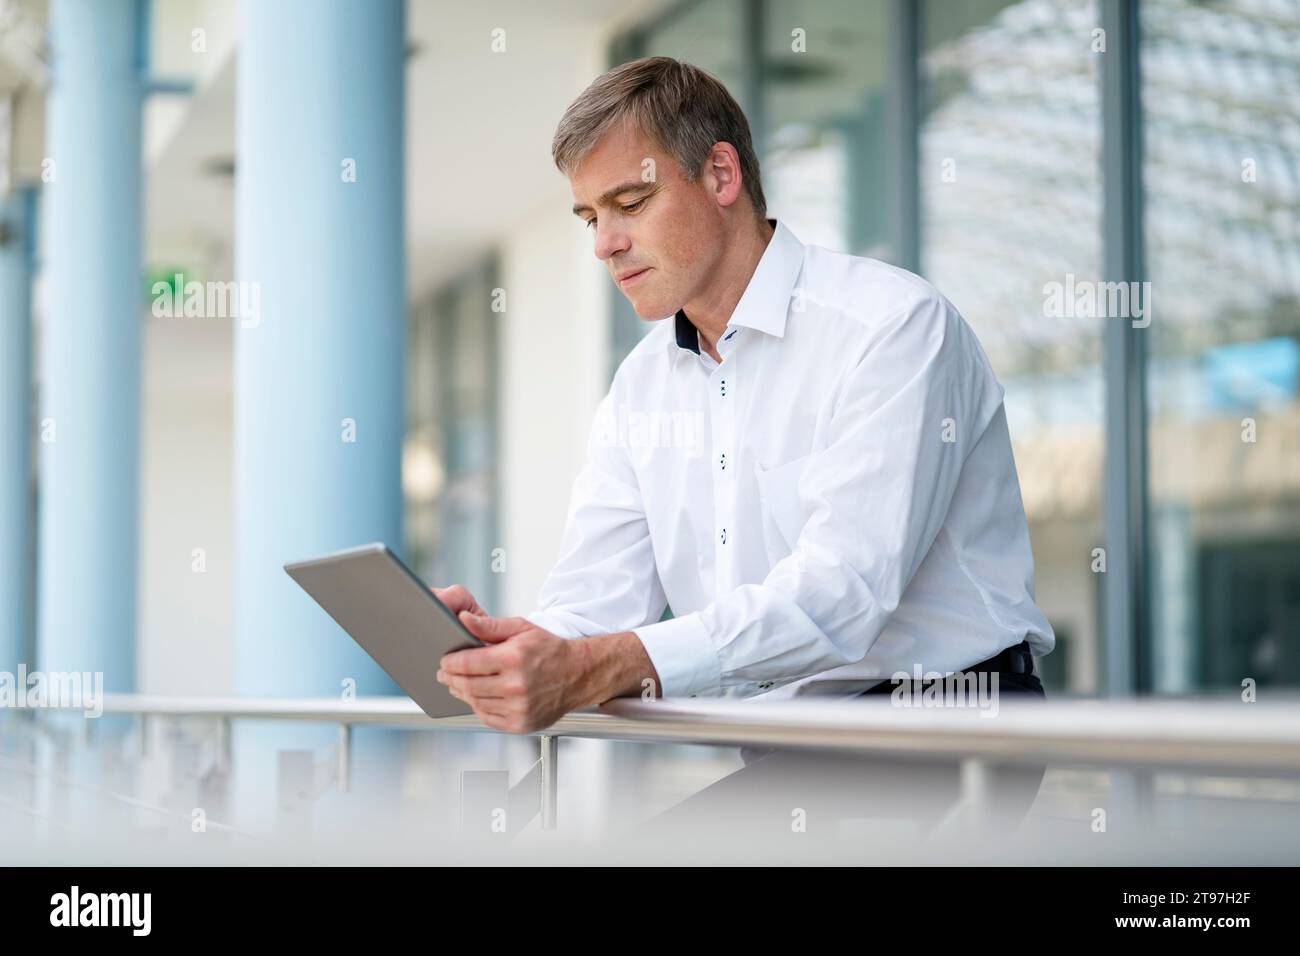 Businessman leaning on railing in office building using digital tablet Stock Photo